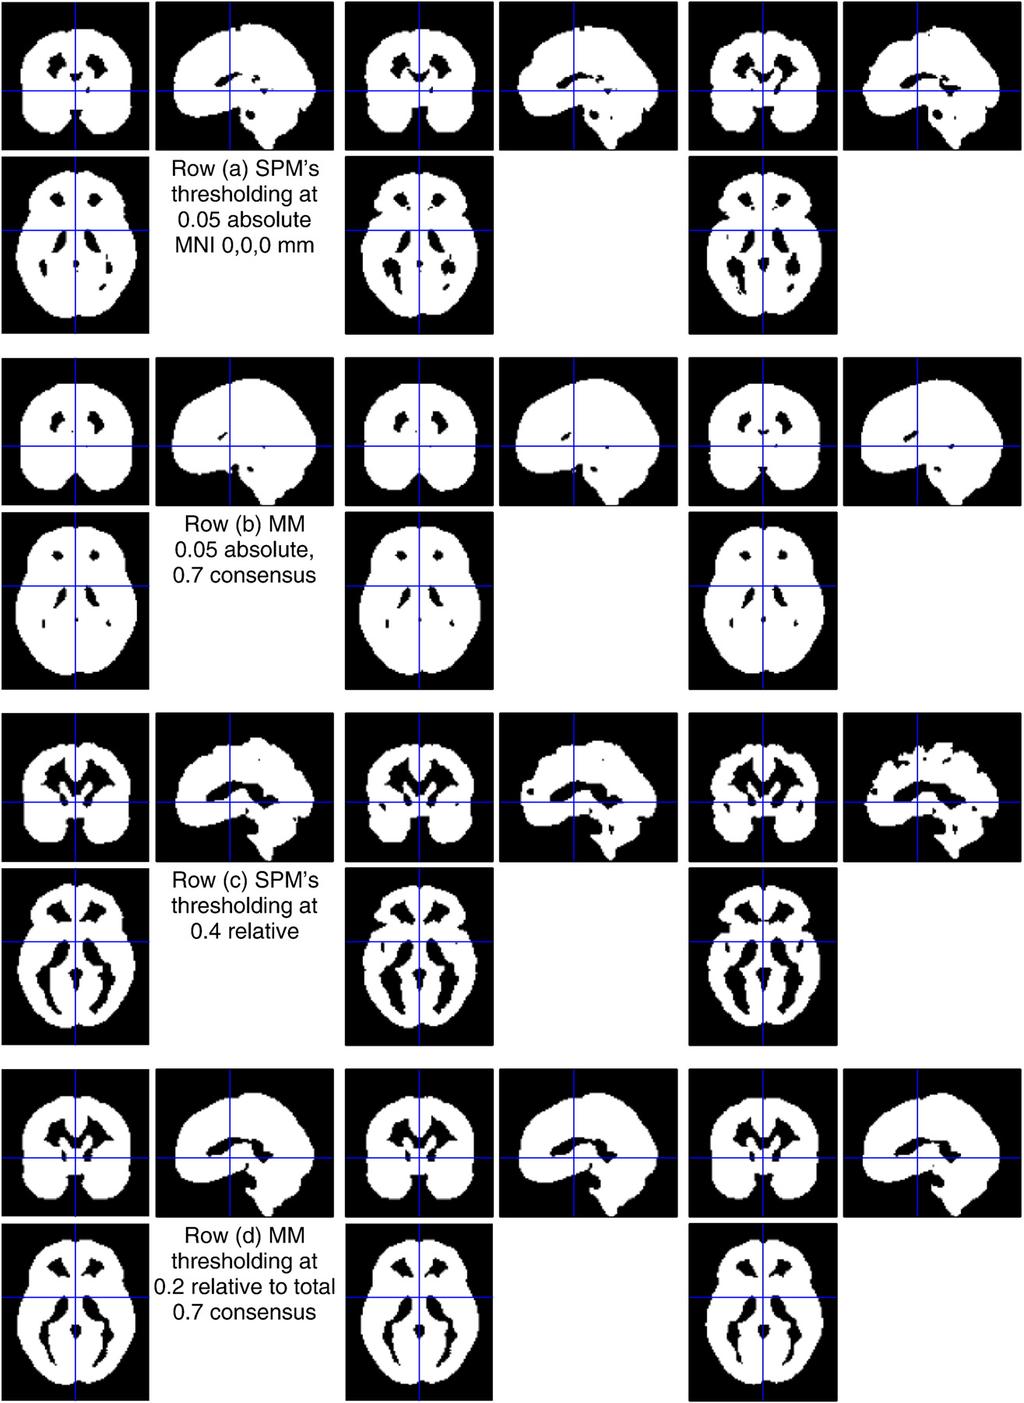 G.R. Ridgway et al. / NeuroImage 44 (2009) 99 111 105 Fig. 5. Masking results for varying method and patient group composition.